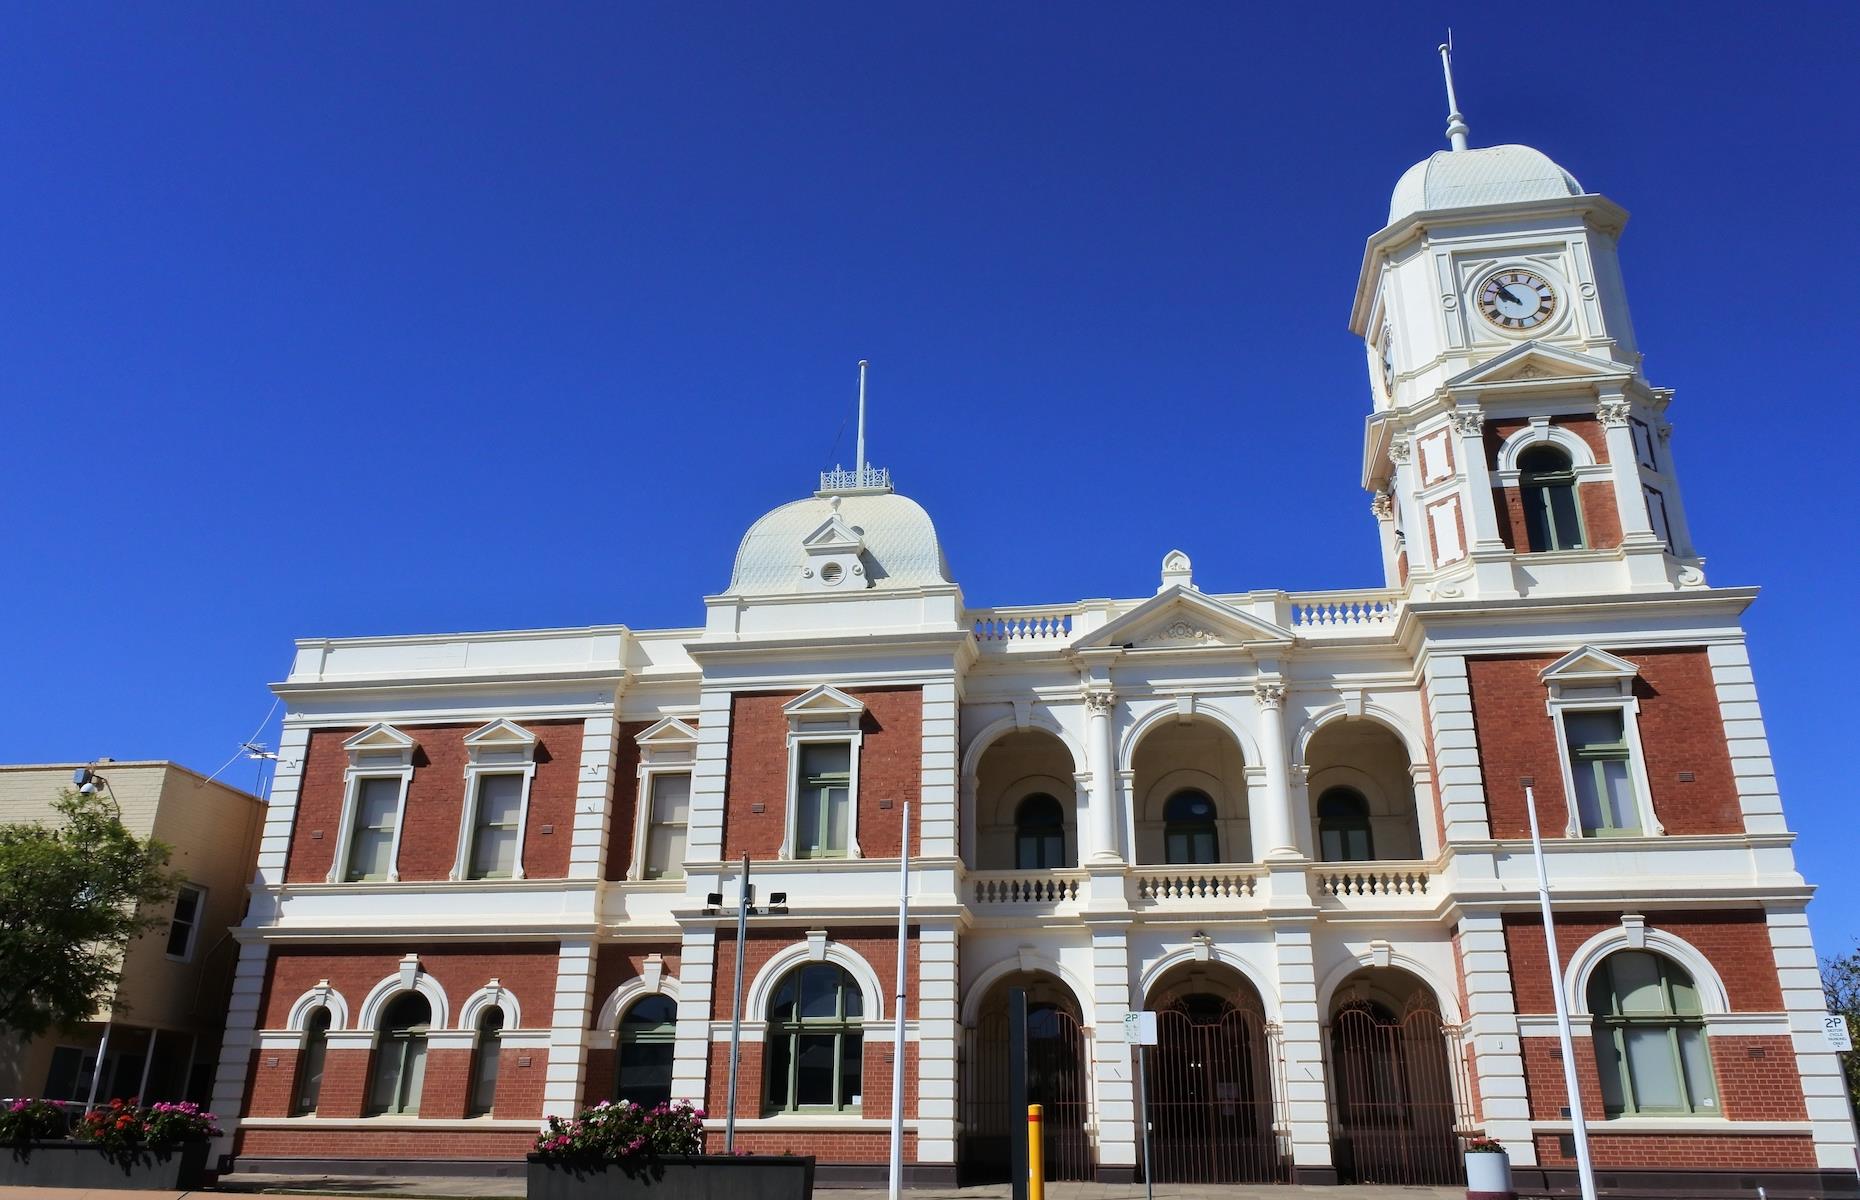 <p>The twin mining towns became the city of Kalgoorlie-Boulder in 1989. Kalgoorlie’s Hannan Street is lined with the grand facades of turn-of-the-century architecture constructed as the city’s coffers flourished. Pop into the 1897 Palace Hotel for a cold beer and a taste of the past or immerse yourself in gold-mining history at the Museum of the Goldfields. Both centers have beautiful town halls – Boulder’s is home to the Goldfields War Museum (pictured). The biggest wow will come from a gawp at the Super Pit from the lookout. One of the world’s largest open pit gold mines, and the biggest gold mine in Australia, it's part of the so-called Golden Mile where Hannan first struck lucky. </p>